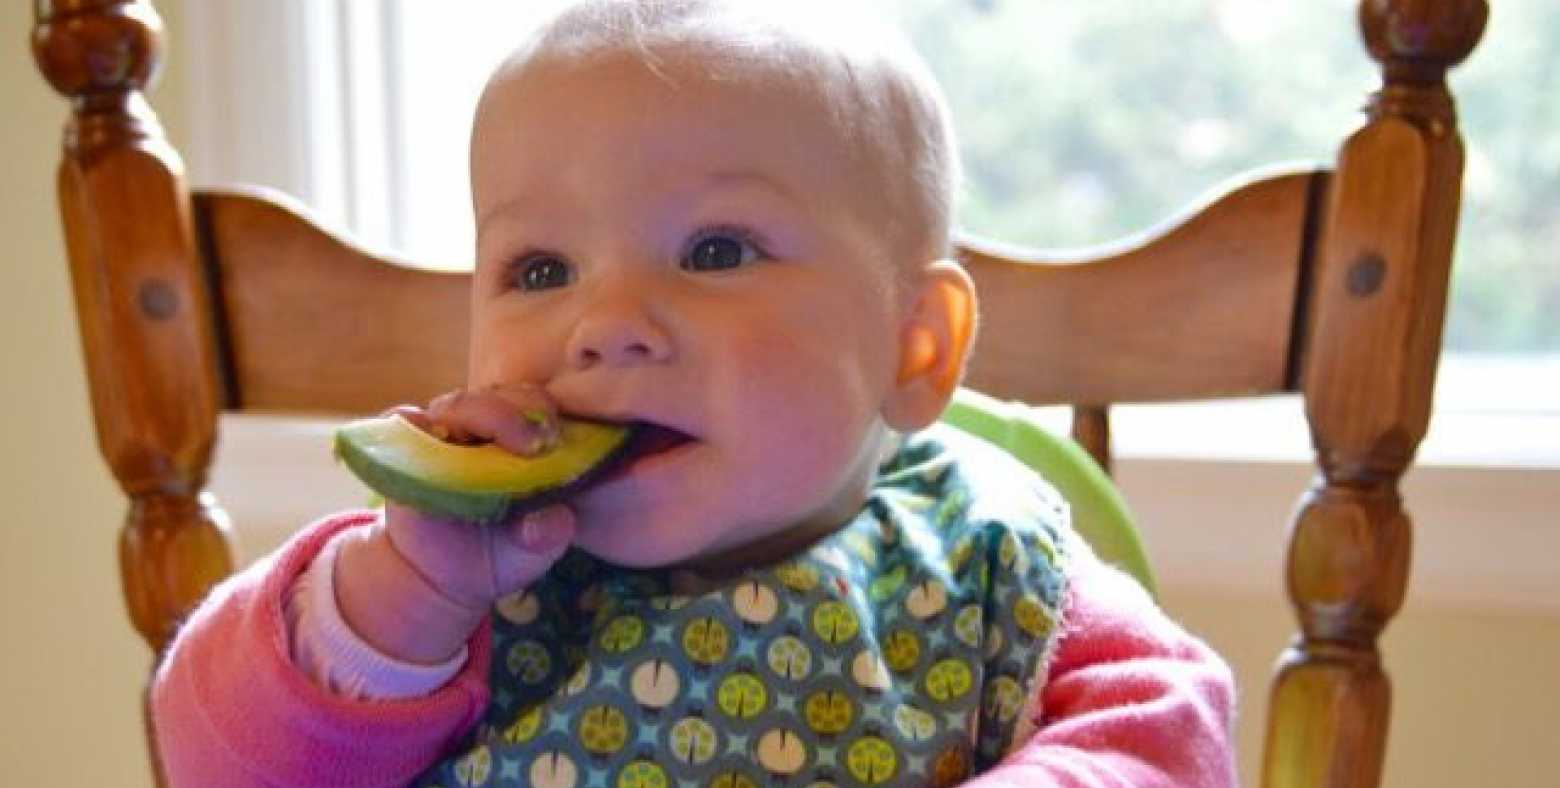 baby on high chair eating slice of avocado